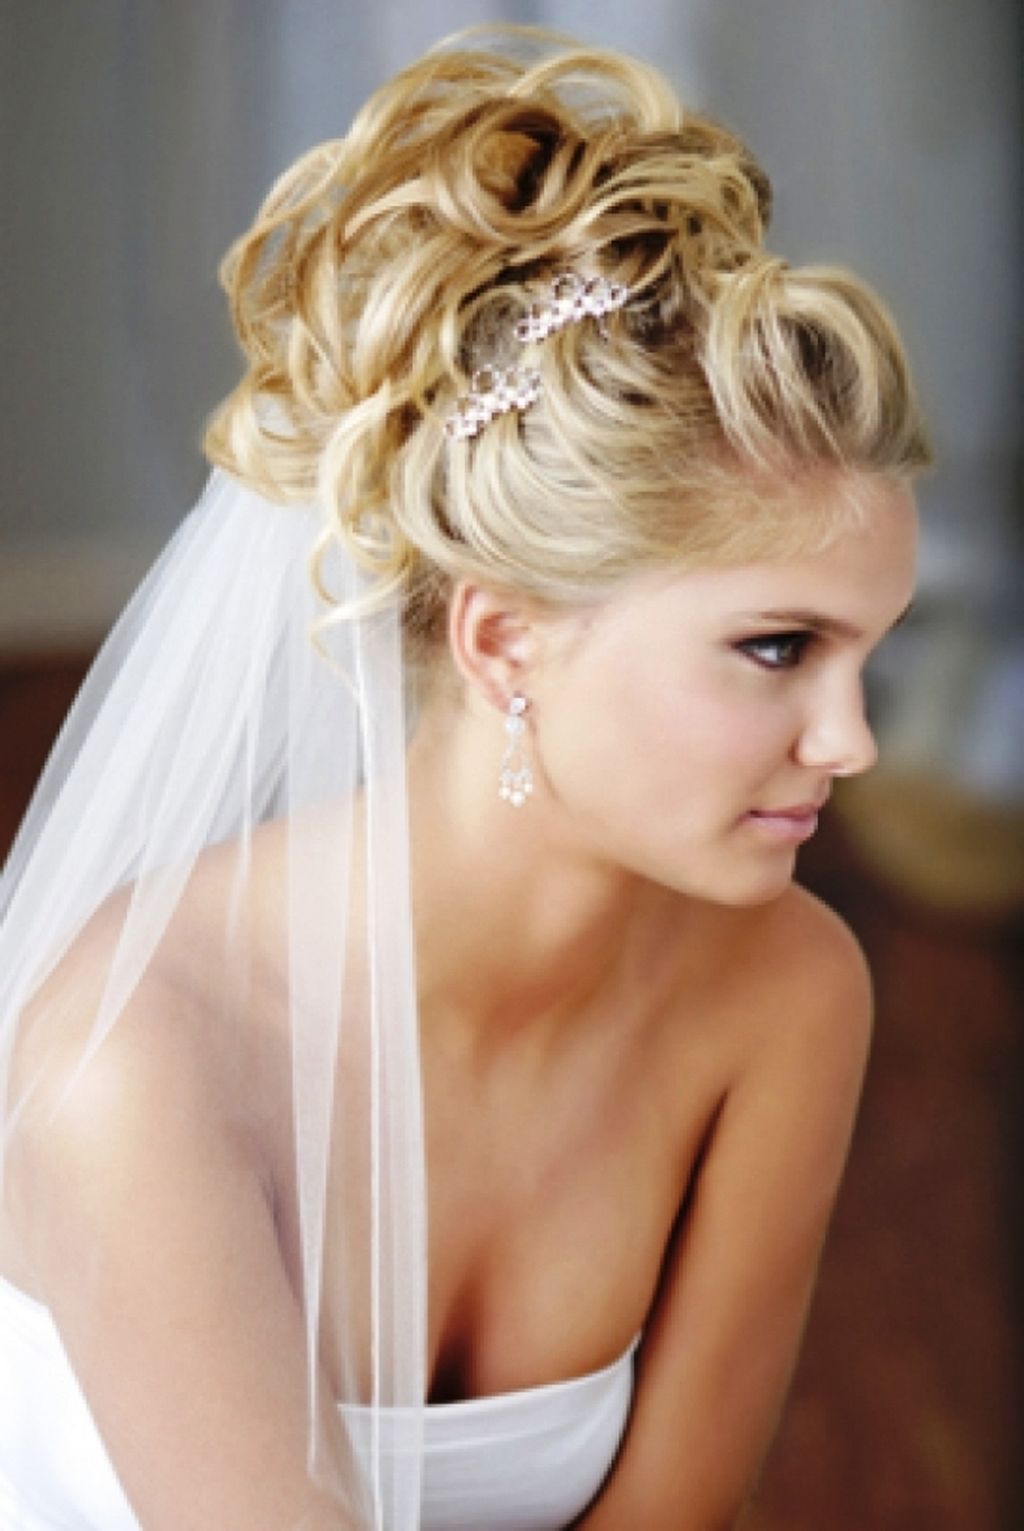 20 Wedding Hairstyle Long Hair You Can Do At Home - MagMent